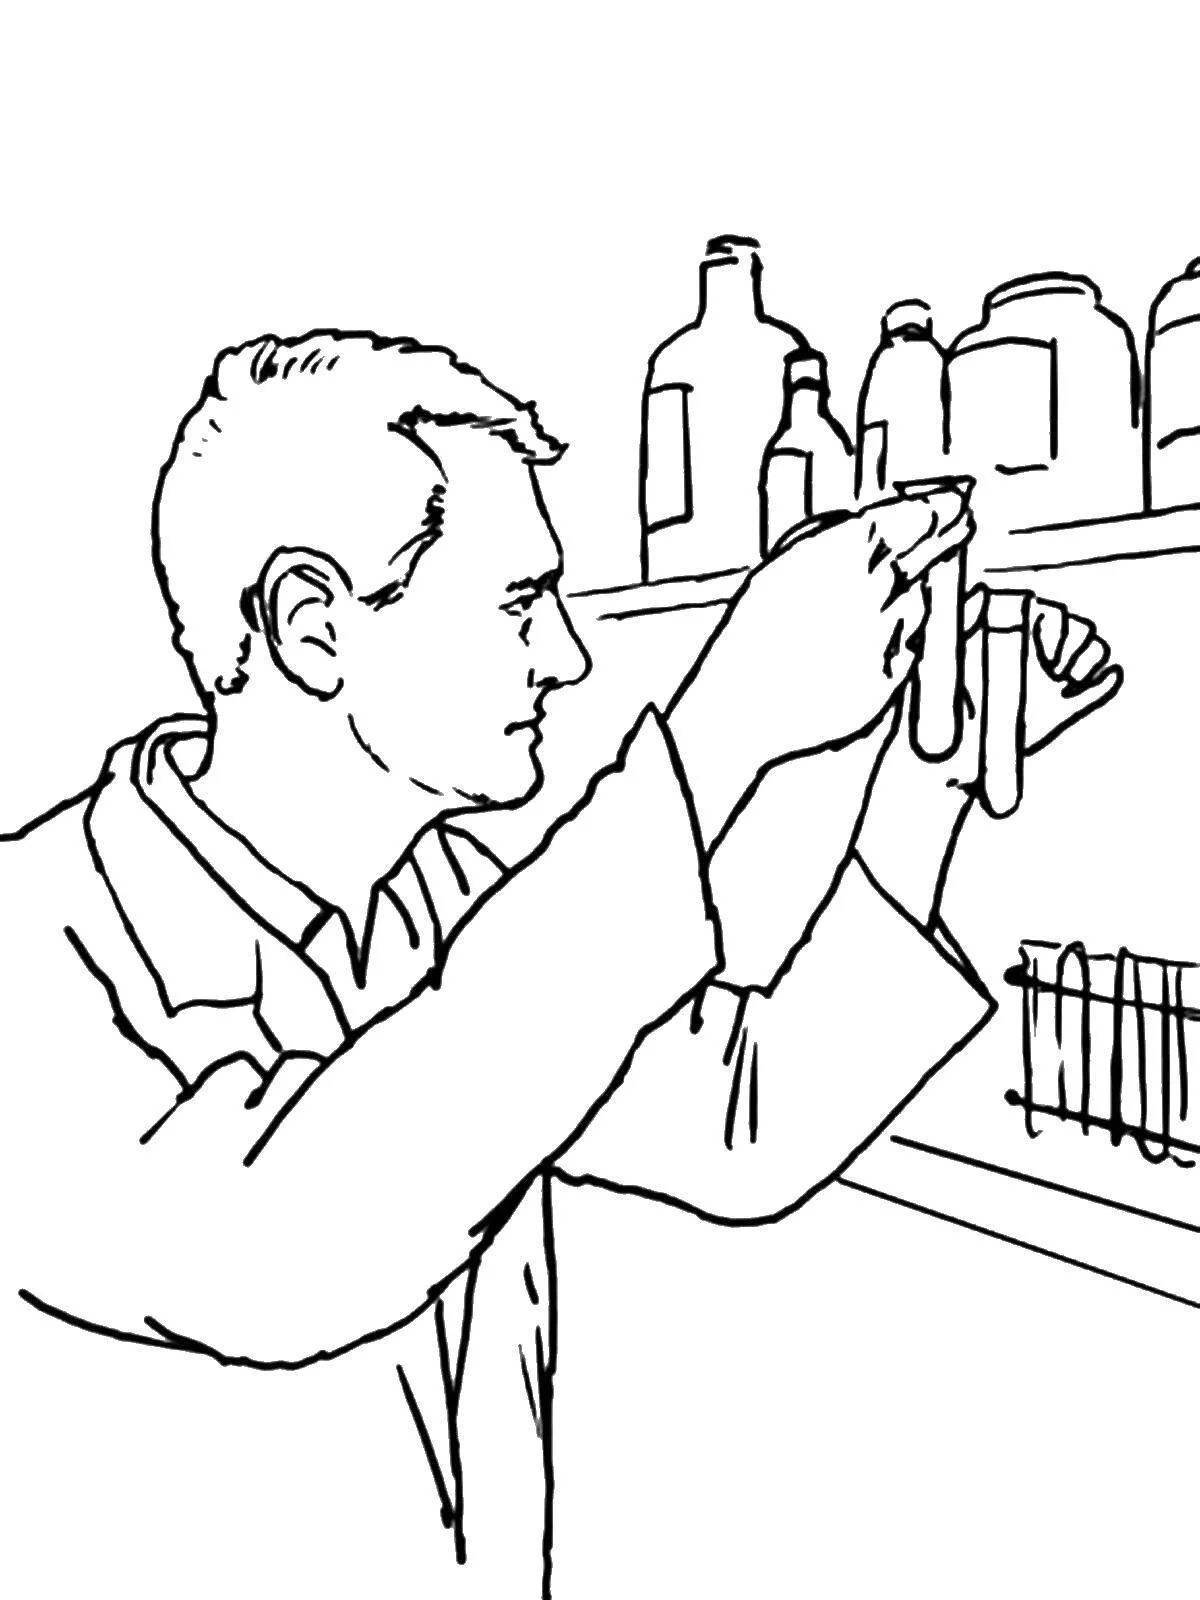 Playful ecologist coloring page